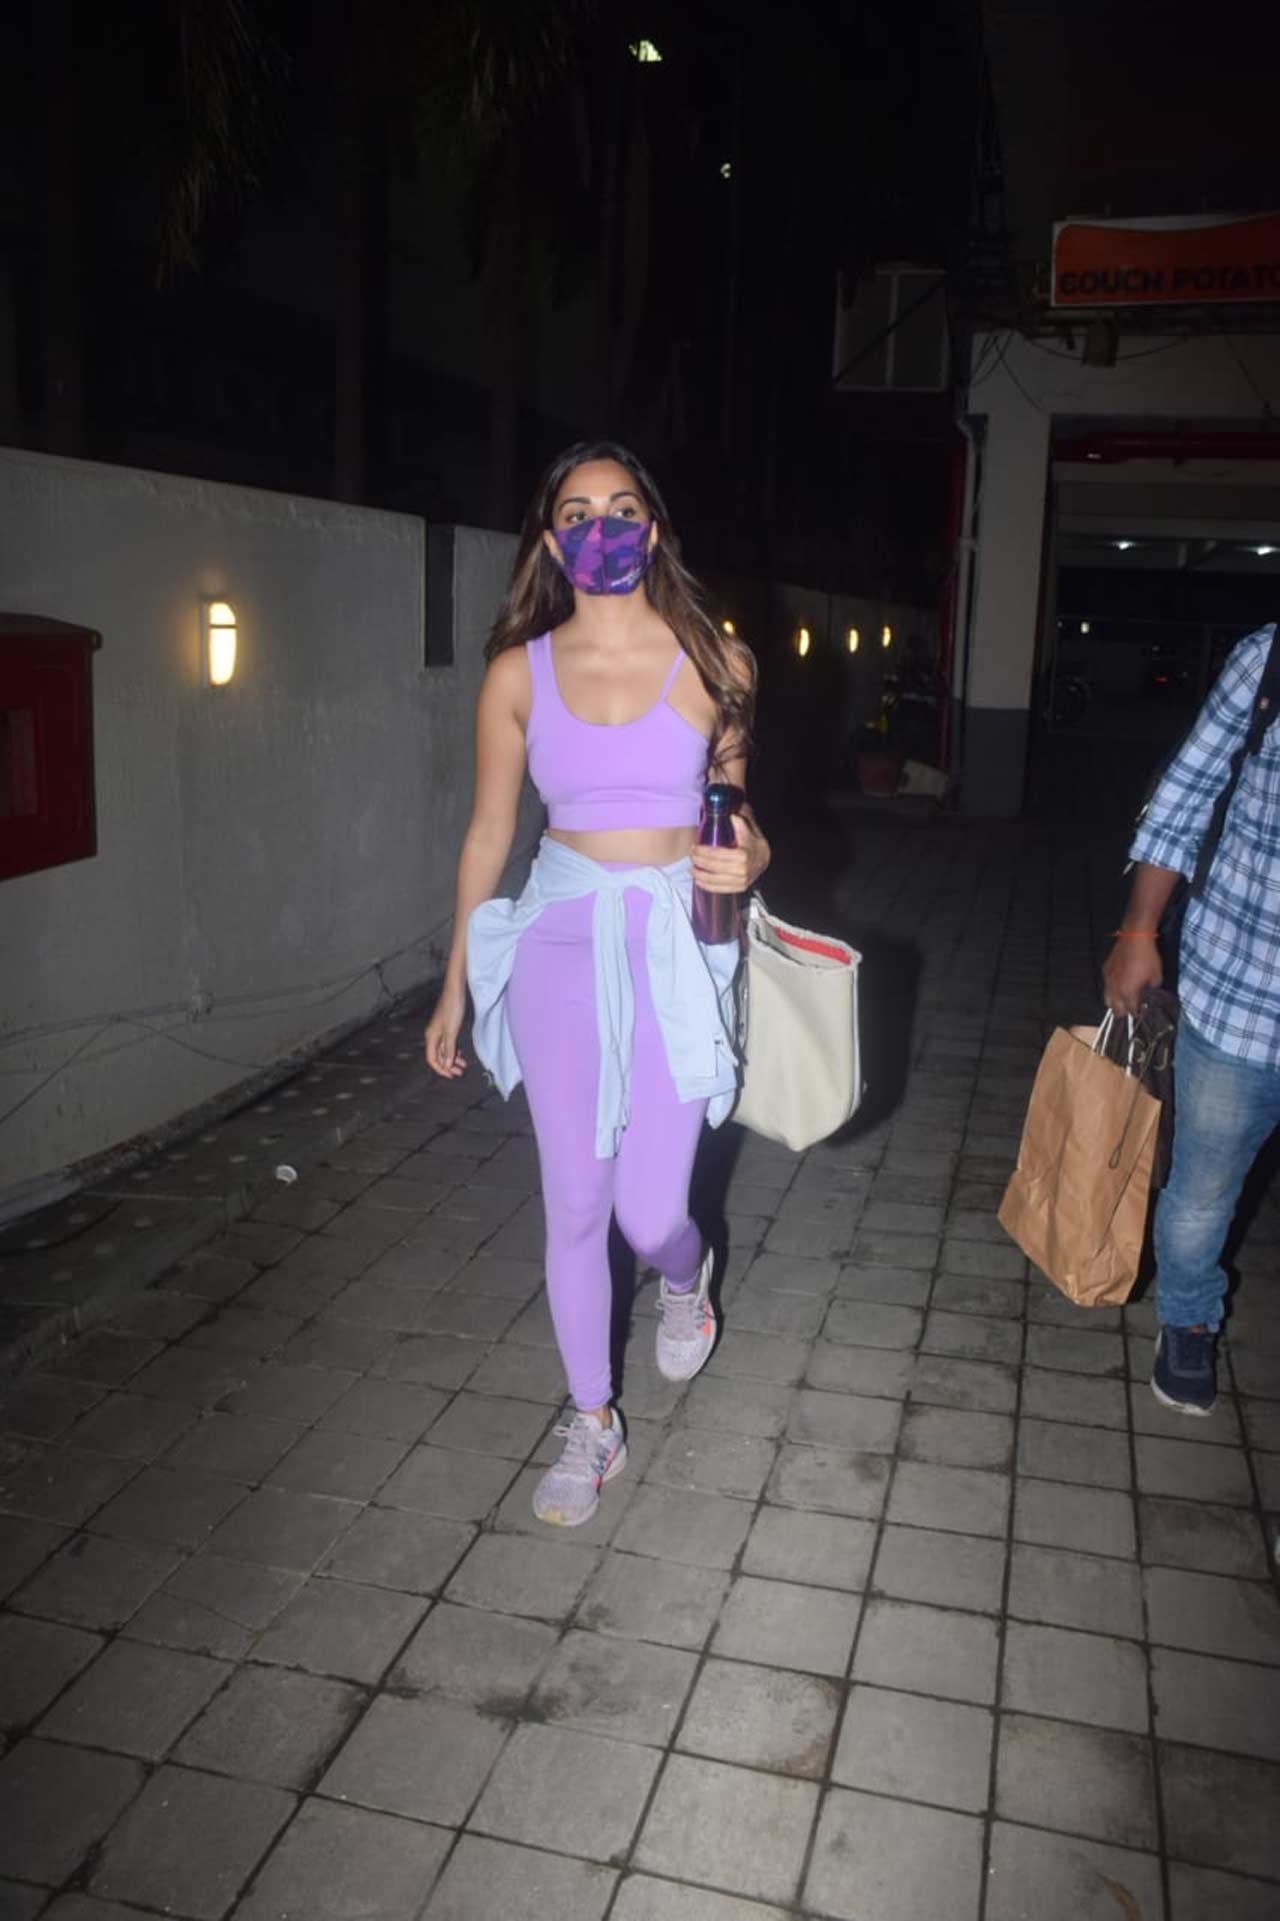 Kiara Advani's lilac coloured athleisure has been taking over the internet by storm. Speaking about her last performance, the actress has been receiving rave reviews for her stint in Shershaah.